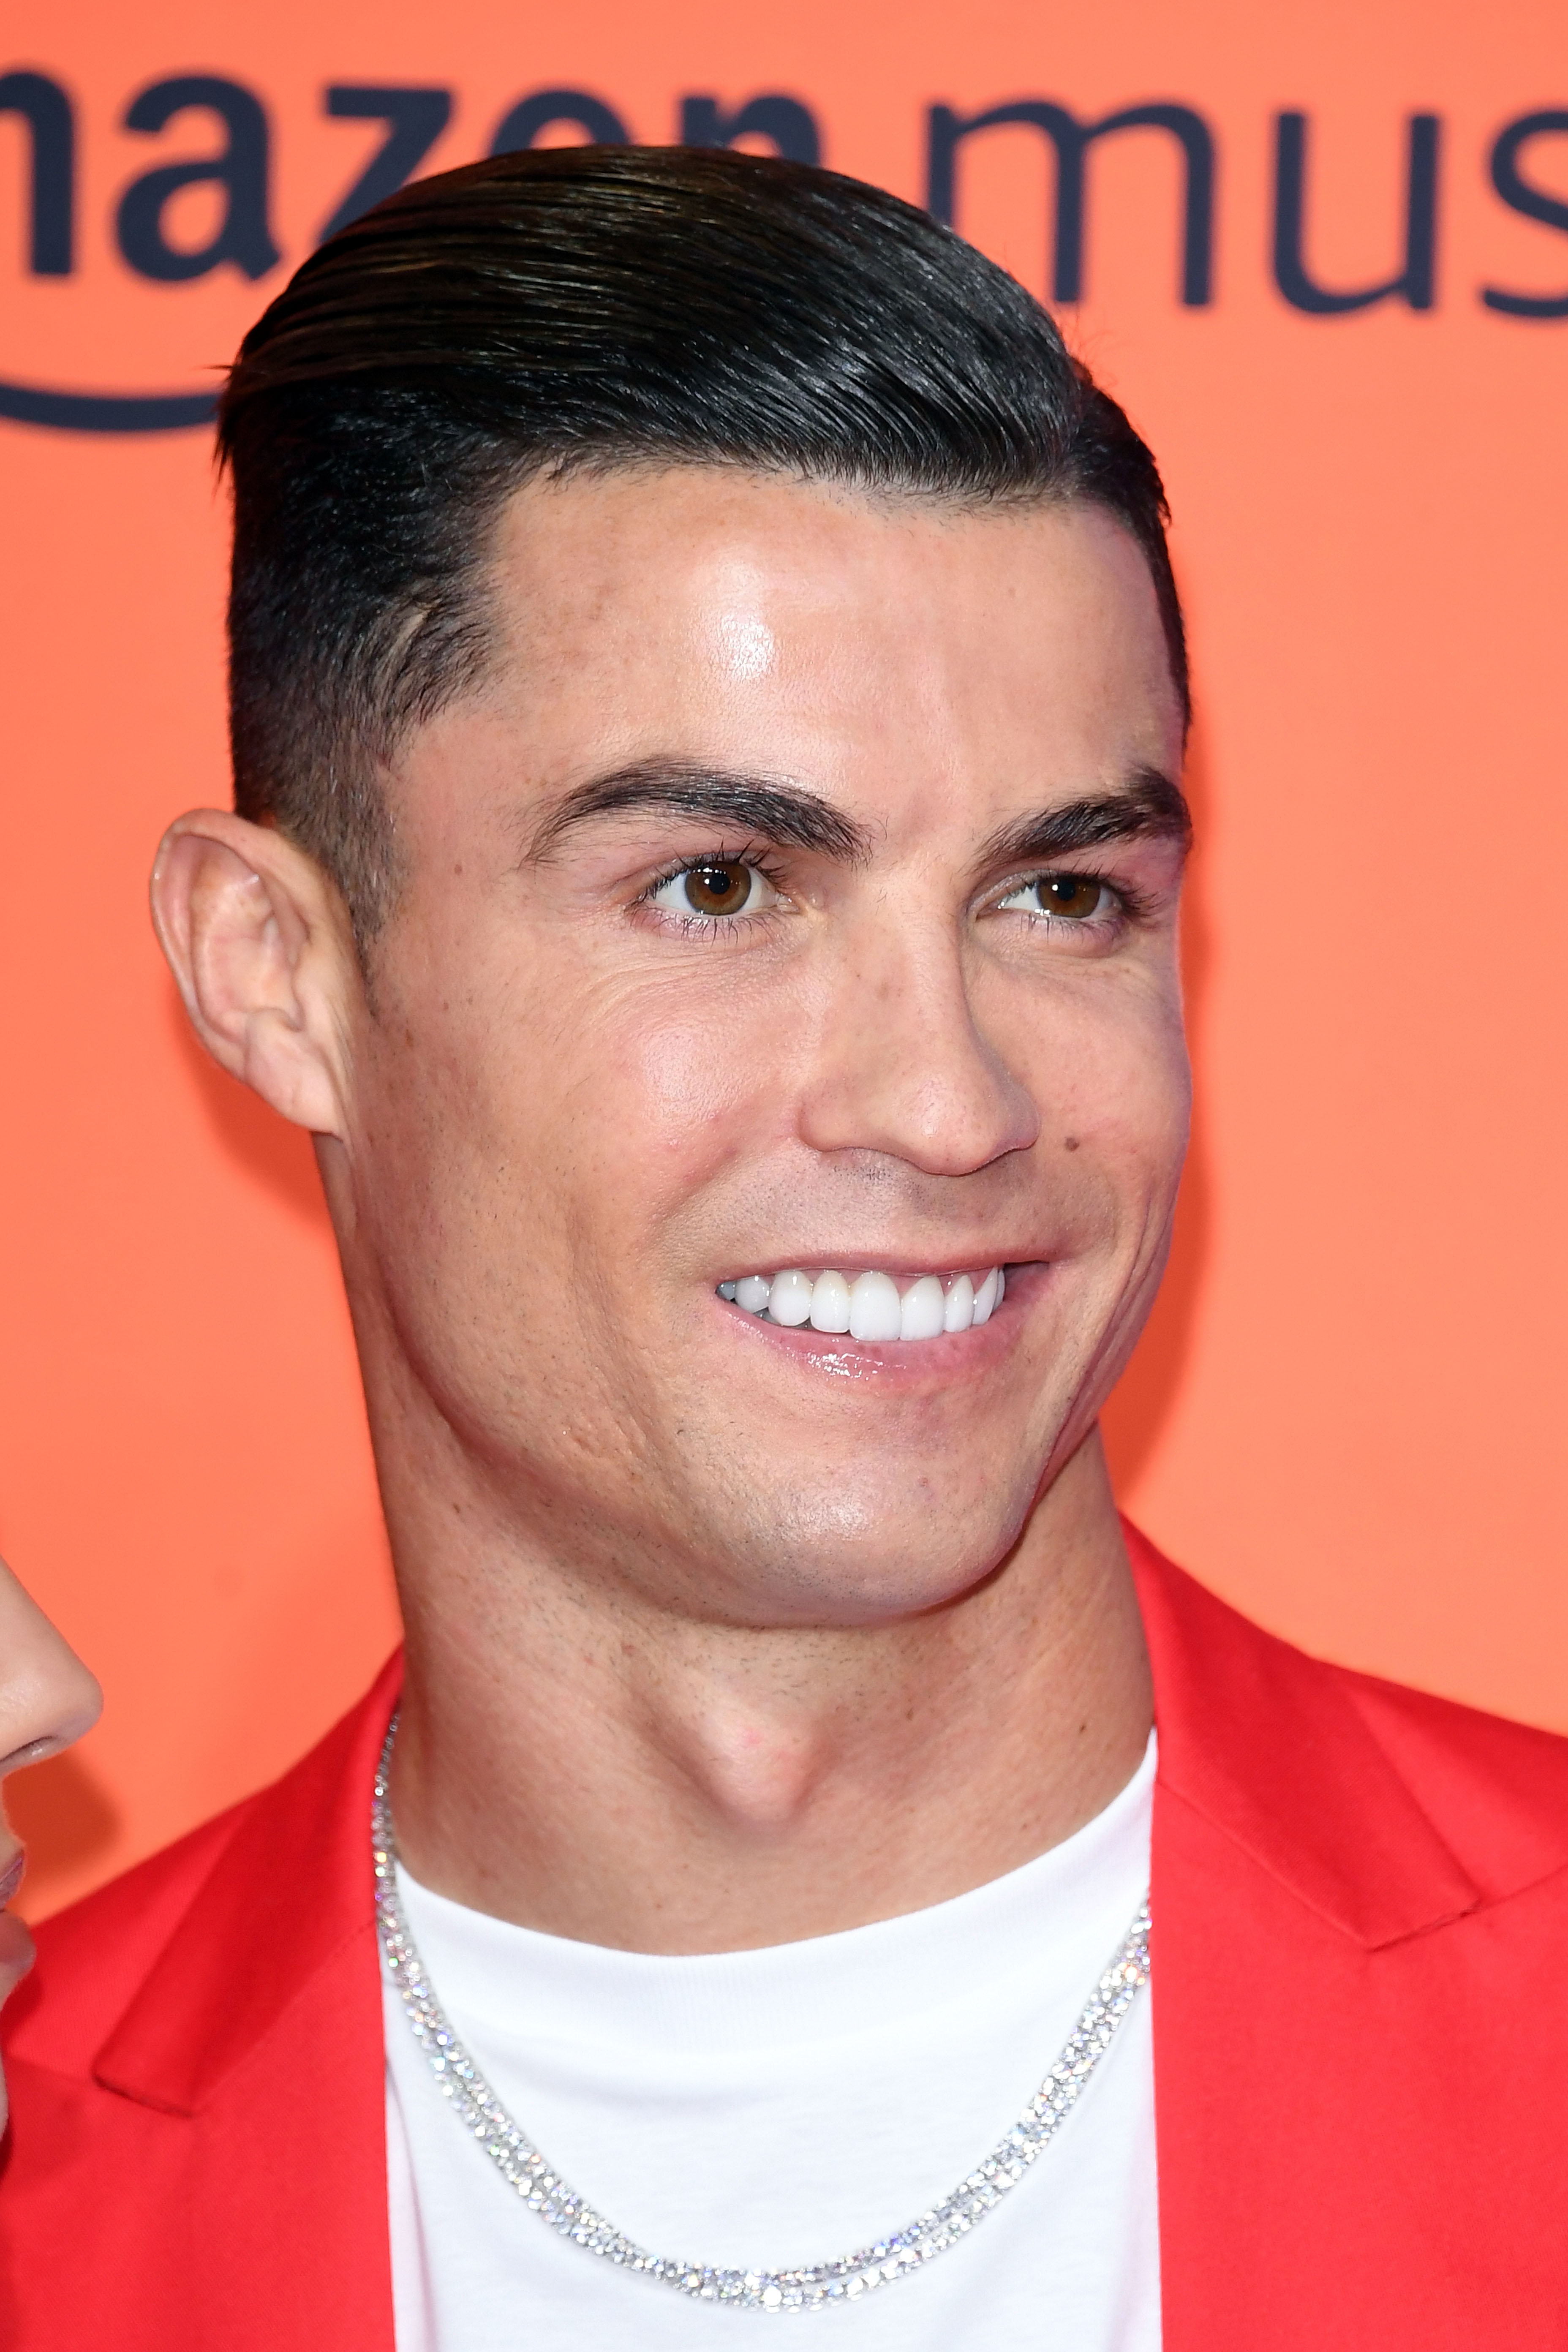 Cristiano Ronaldo at the 2019 MTV EMAs on November 3, 2019, in Seville, Spain. | Source: Getty Images